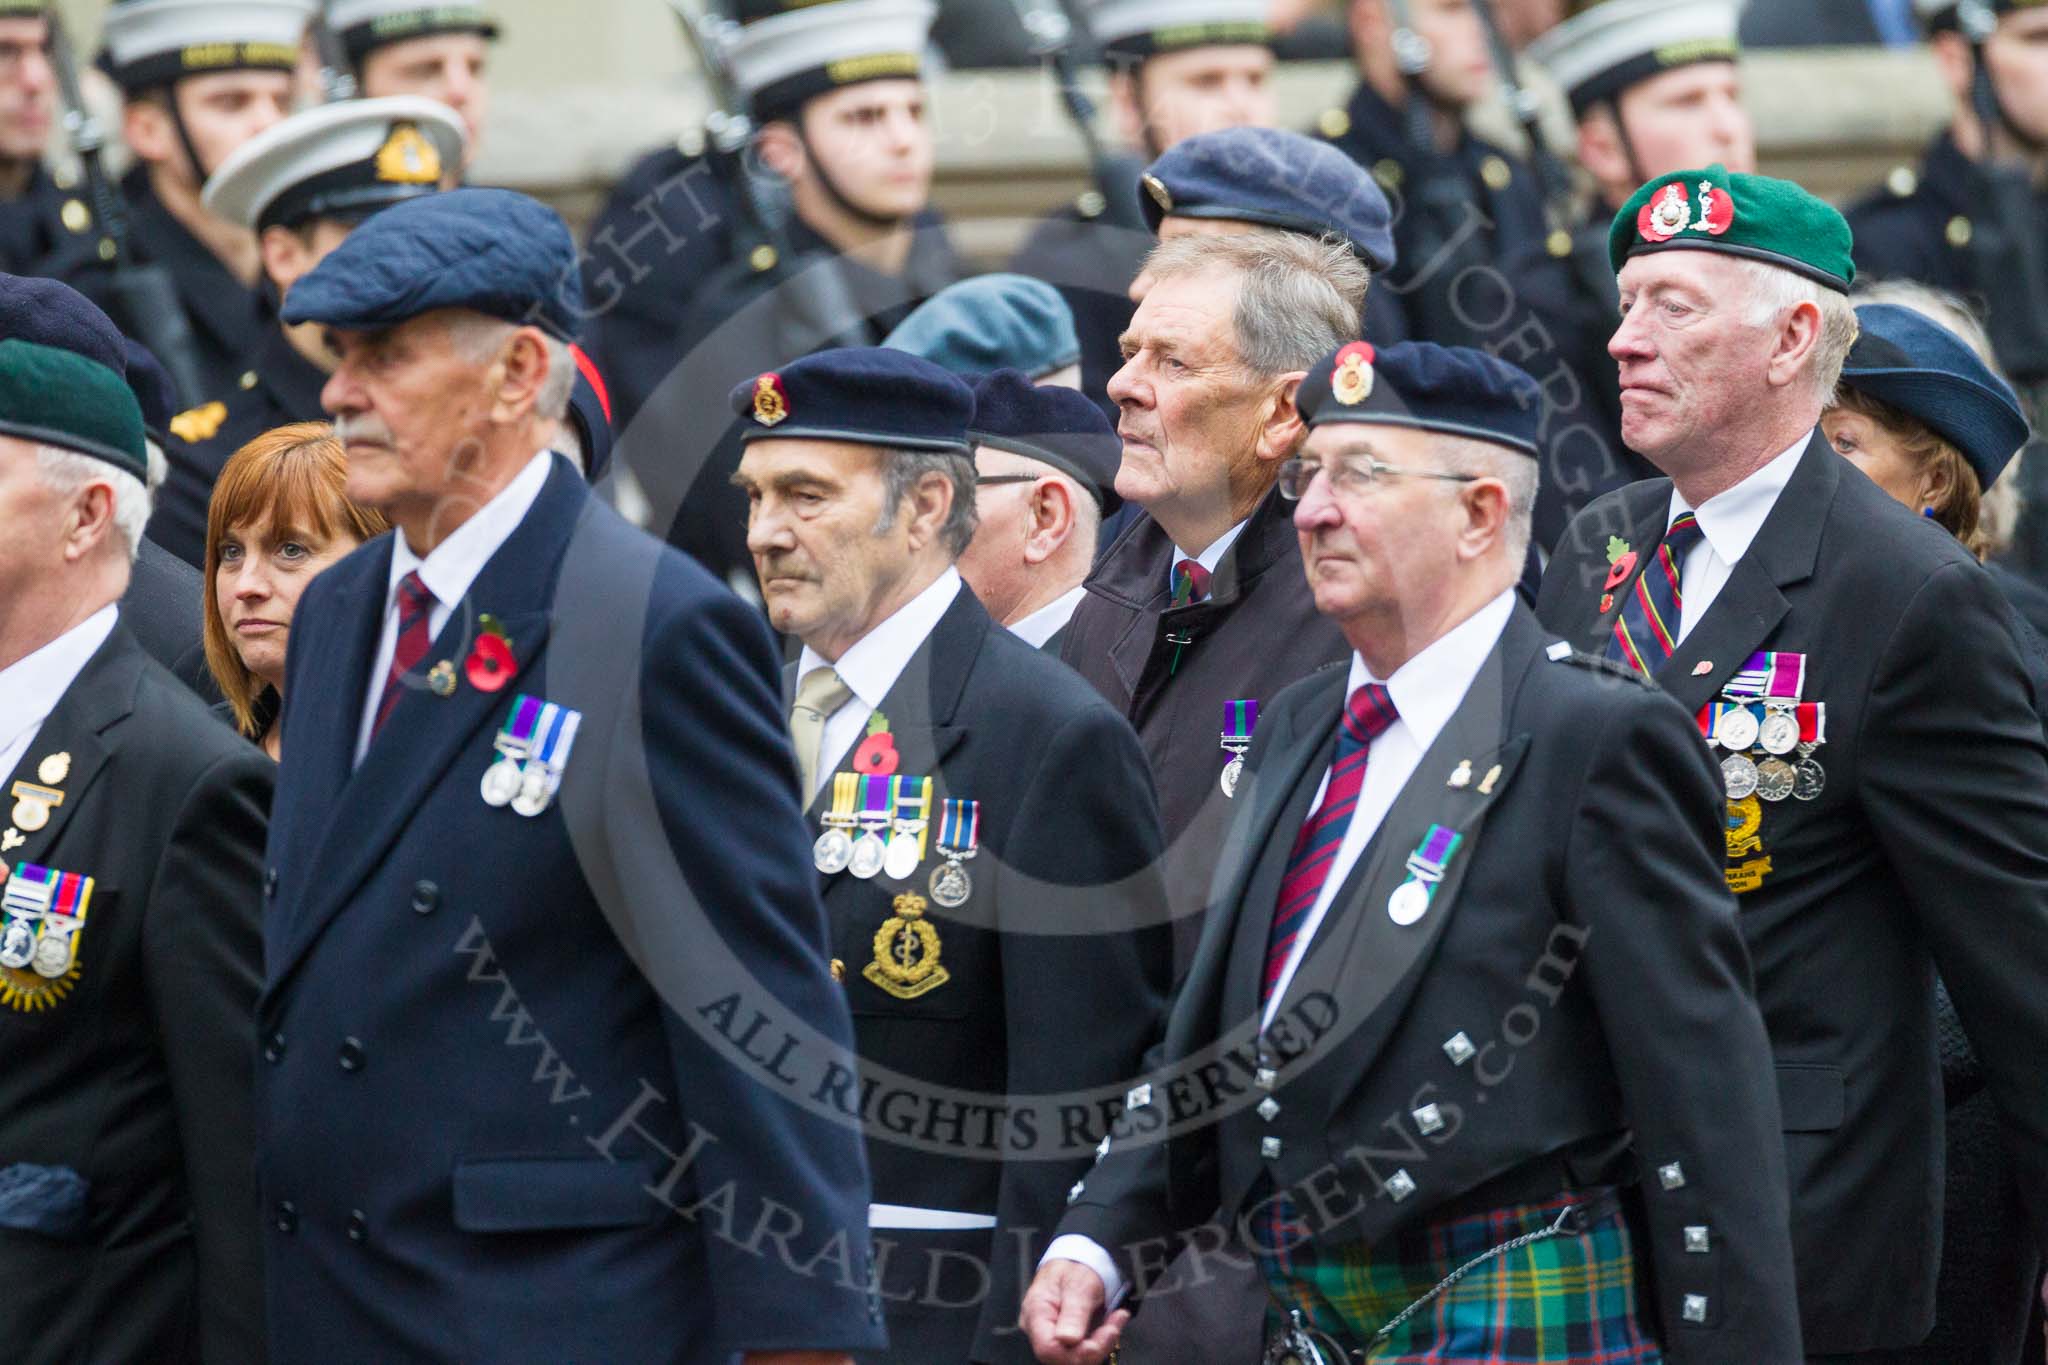 Remembrance Sunday at the Cenotaph 2015: Group F20, Aden Veterans Association.
Cenotaph, Whitehall, London SW1,
London,
Greater London,
United Kingdom,
on 08 November 2015 at 12:06, image #1108